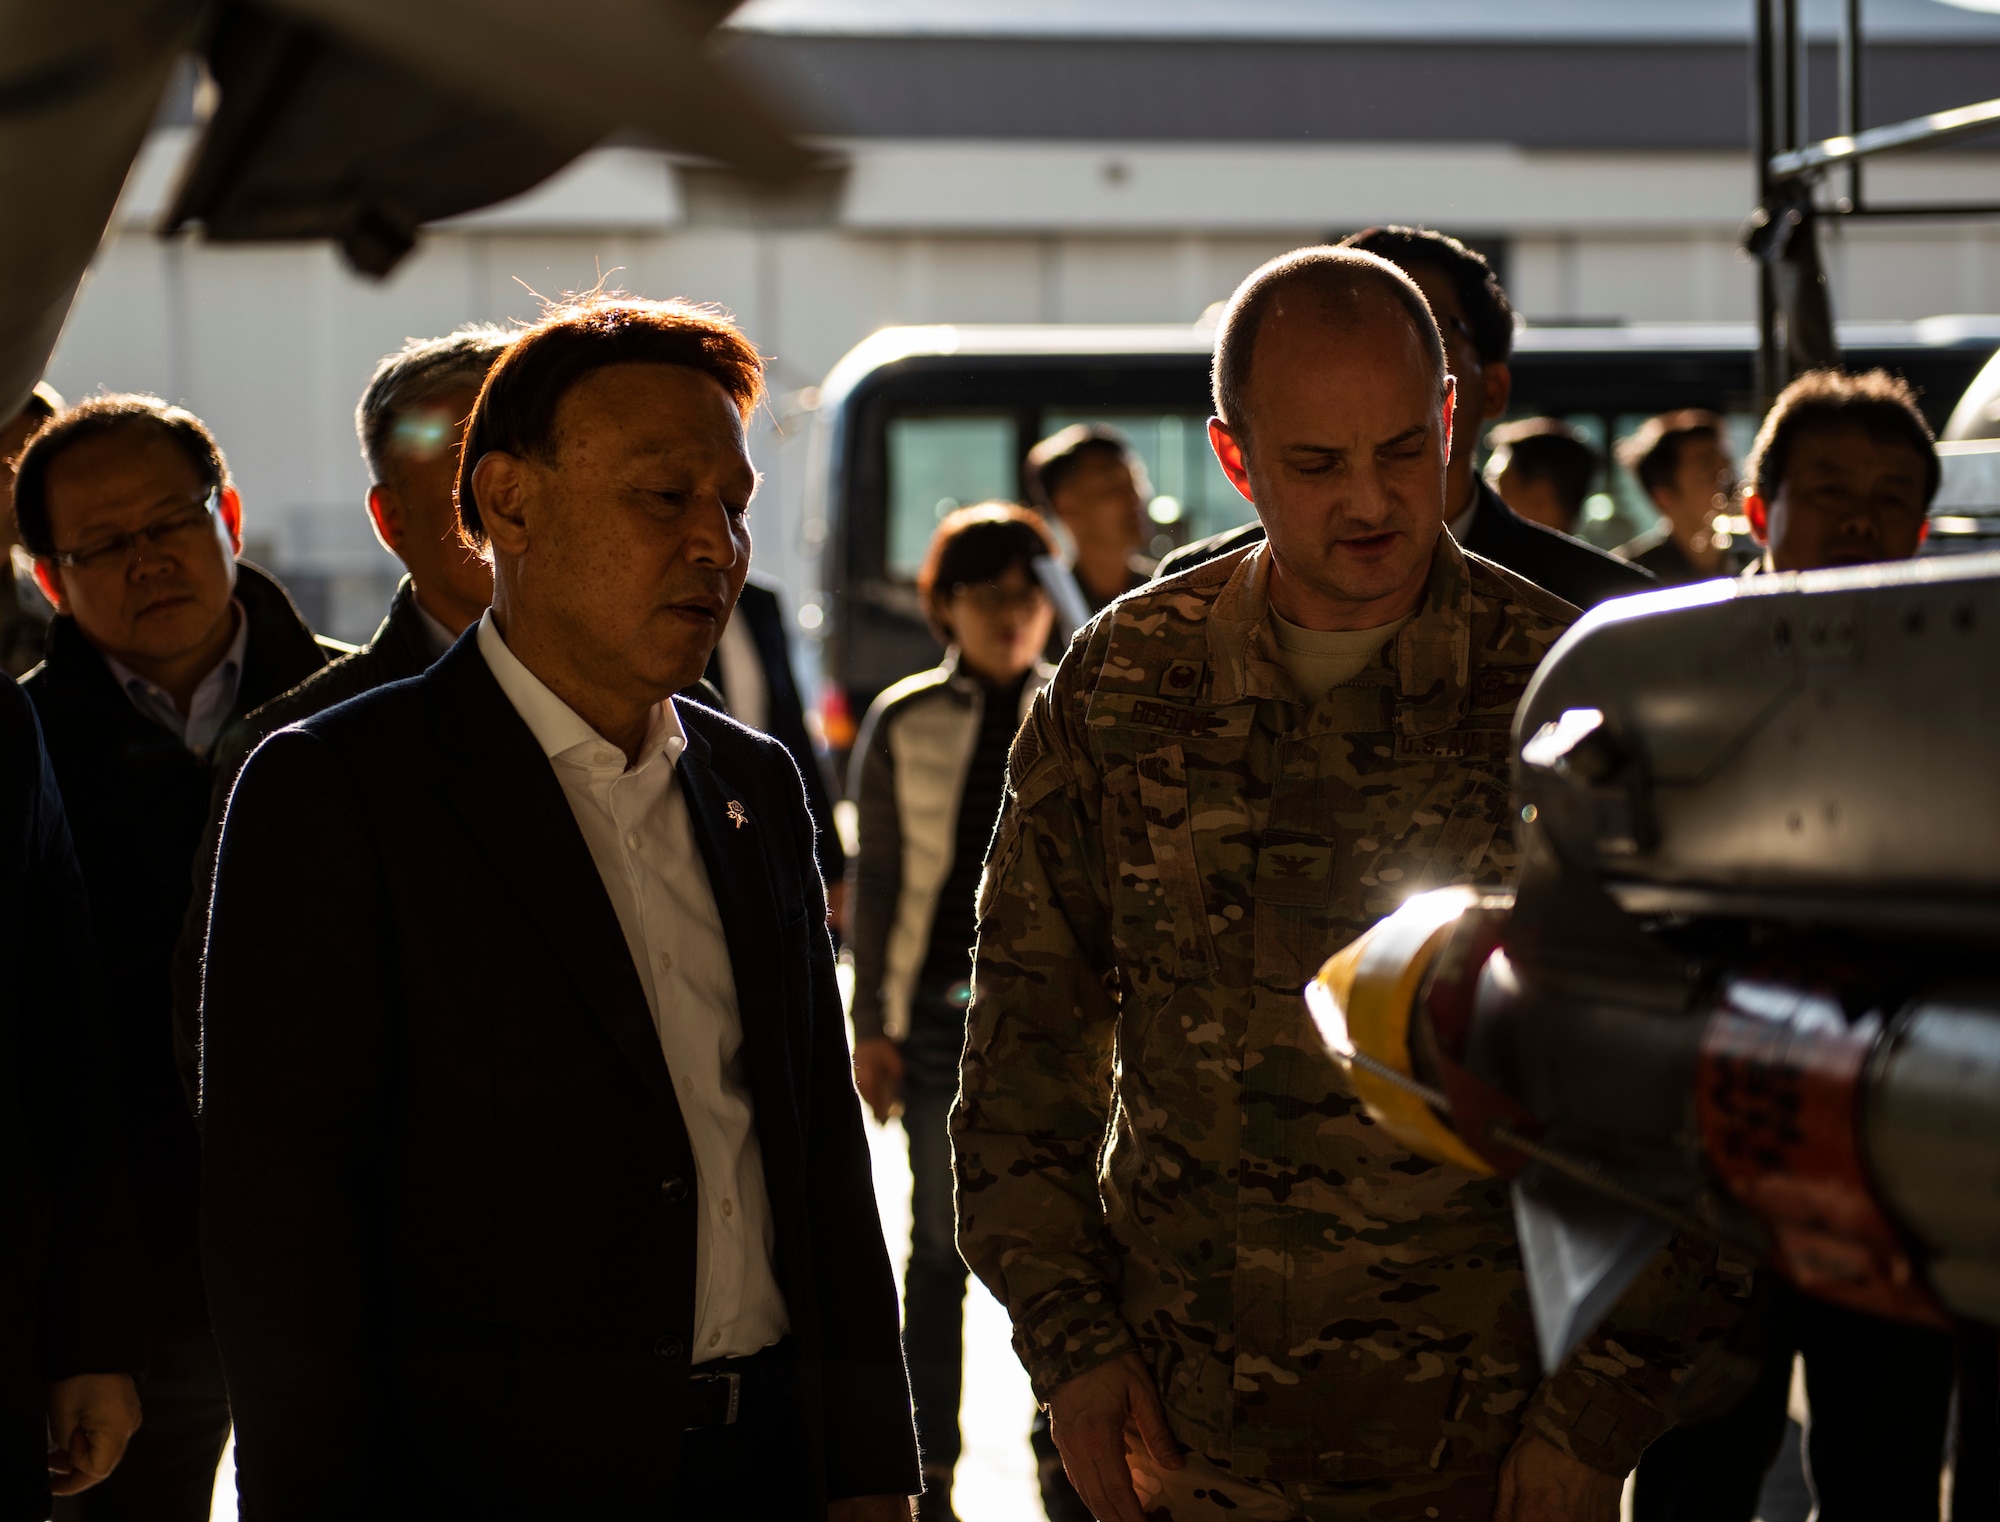 Col. John Bosone, 8th Fighter Wing commander (right), explains features of an F-16 Fighting Falcon to Kang Imjune, Mayor of Gunsan (left), at Kunsan Air Base, Republic of Korea, Oct. 19, 2018. Mayor Imjune was shown the different ways Kunsan AB contributes to the overall safety and security of the Korean Peninsula.   (U.S. Air Force photo by Senior Airman Stefan Alvarez)